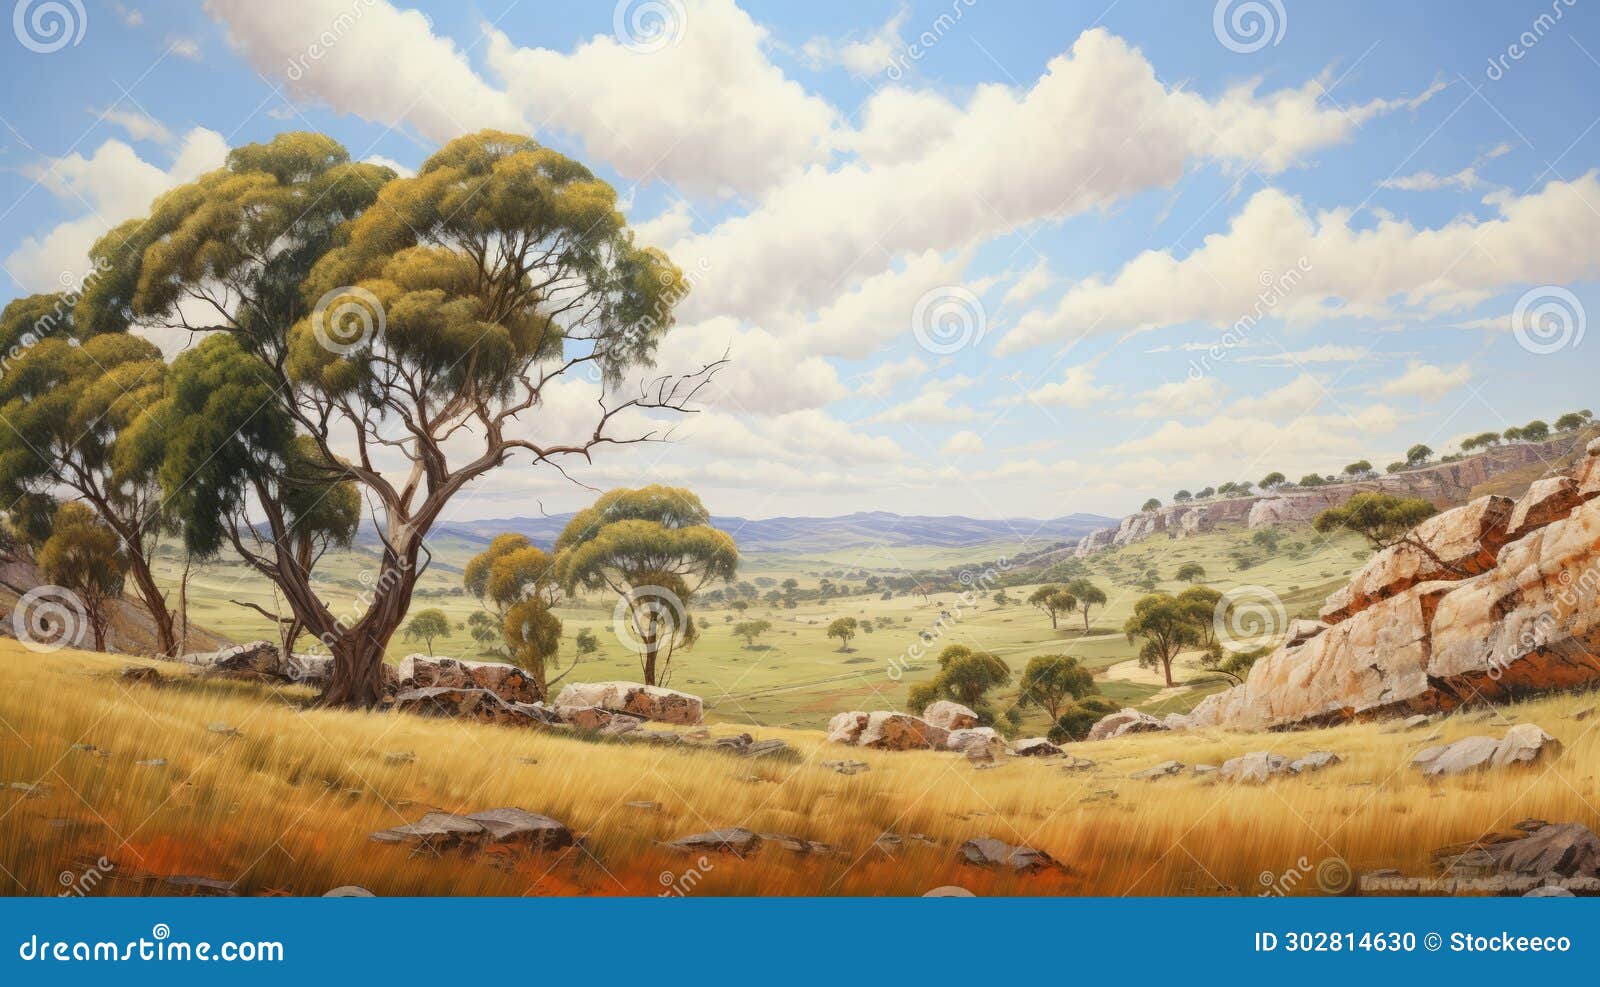 hill of australia: a naturalistic landscape painting in the style of greg hildebrandt